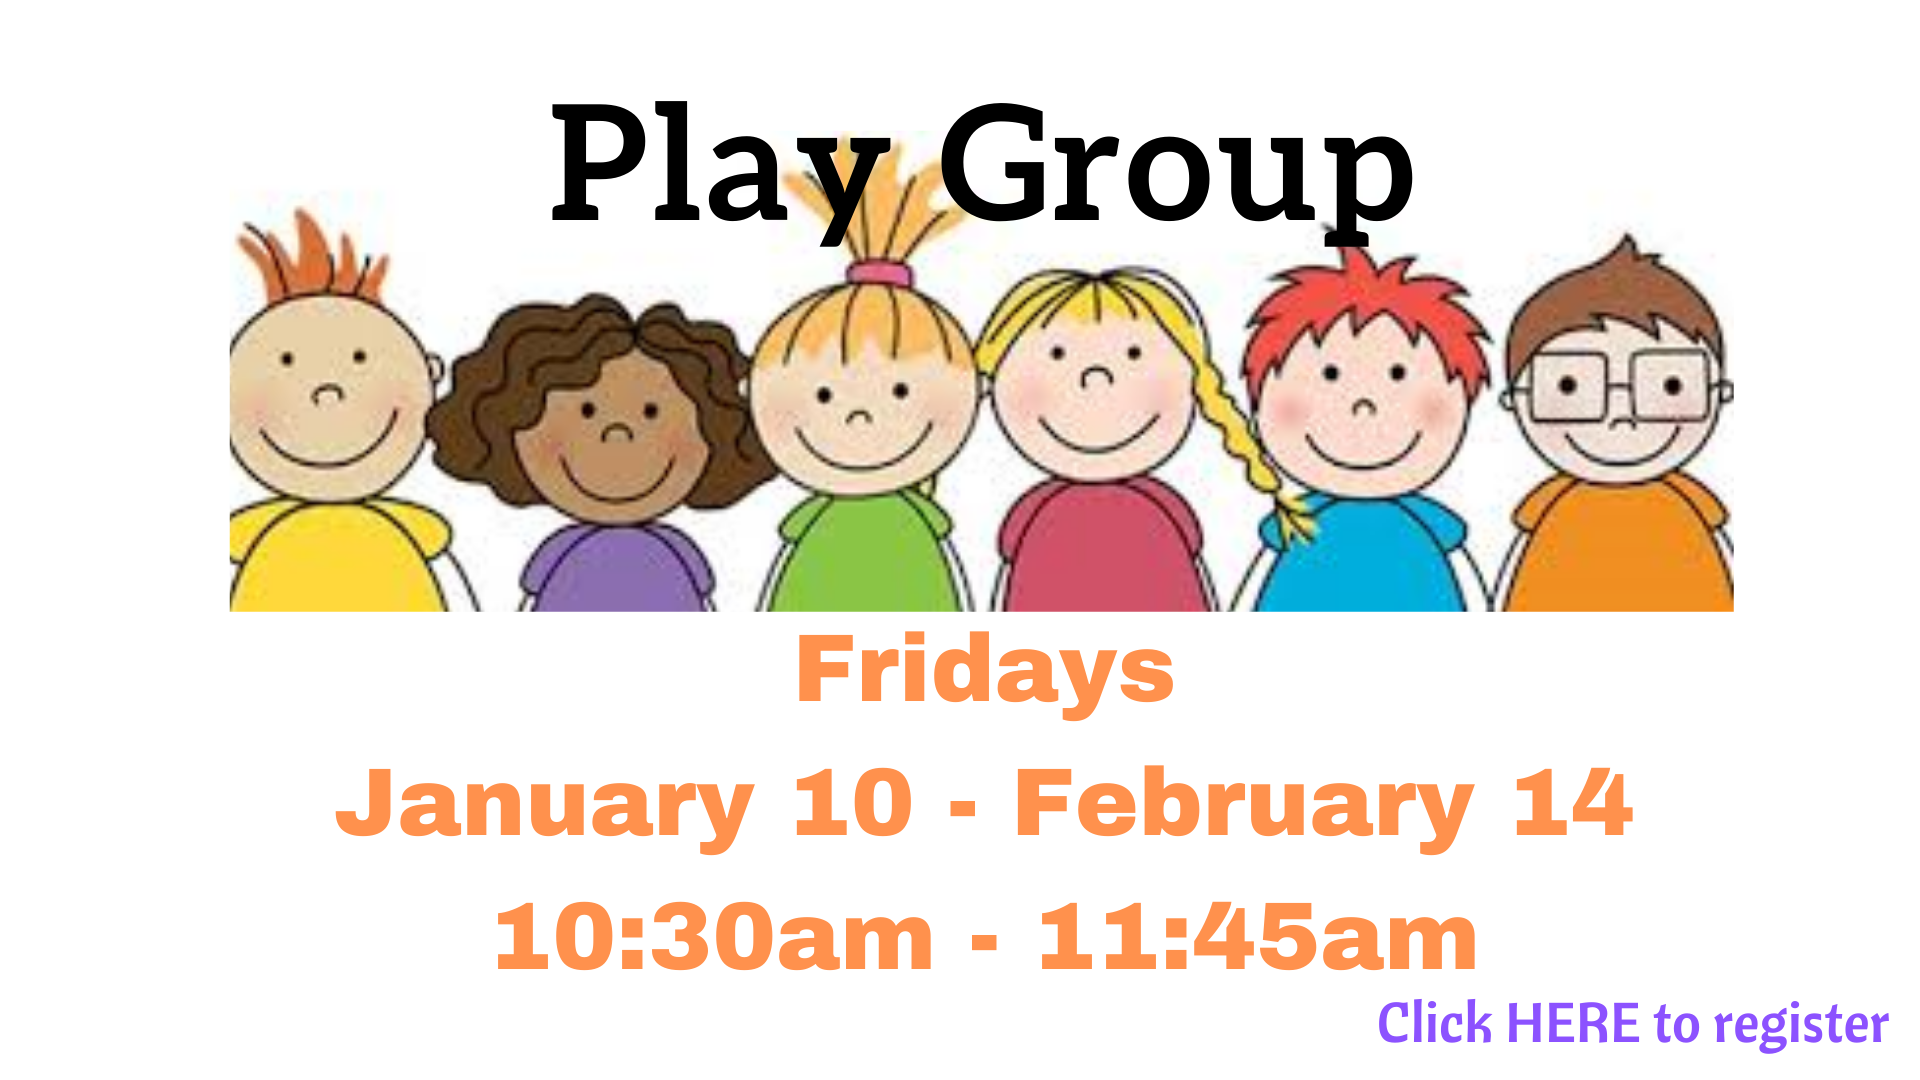 CAROUSEL Play Group 1.10.20-2.14.20.png